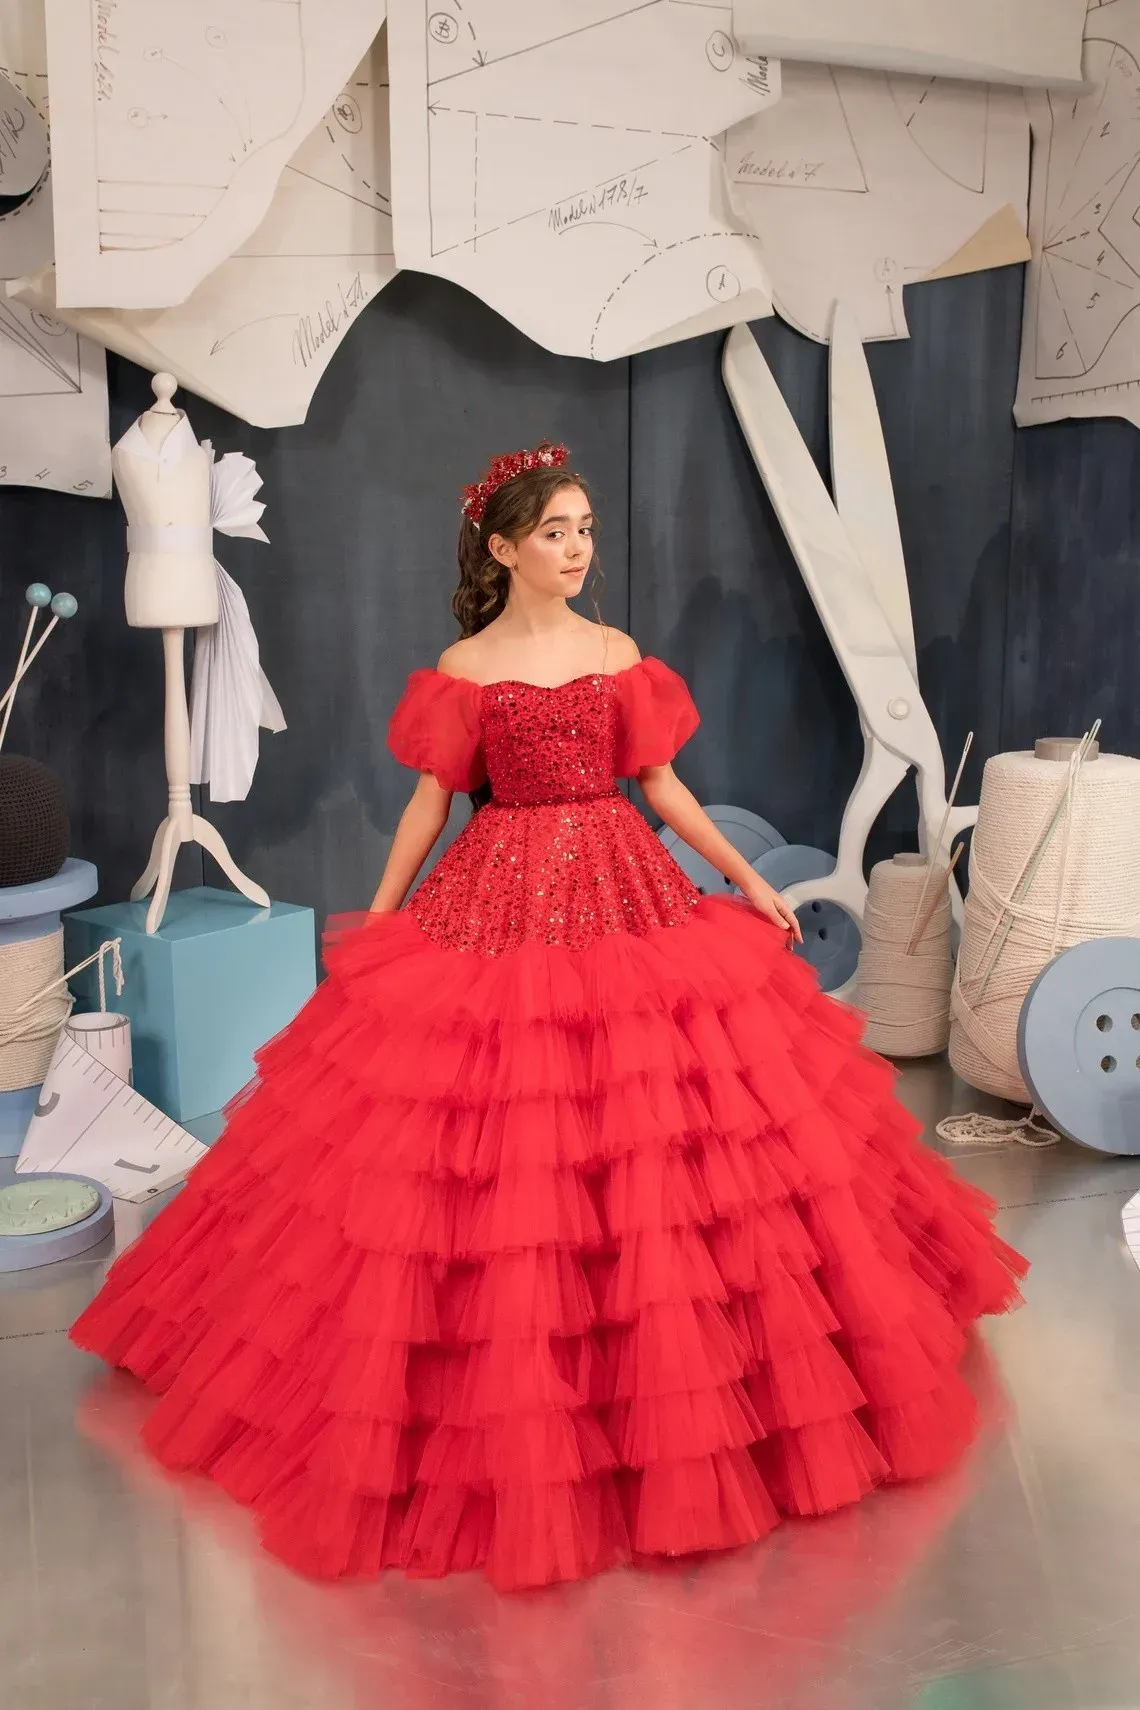 Sexy Red Long Flower Girl Dresses Off the Shoulder Sequin Short Sleeves Ball Gown Tiered Tulle Floor Length Custom Made for Wedding Party